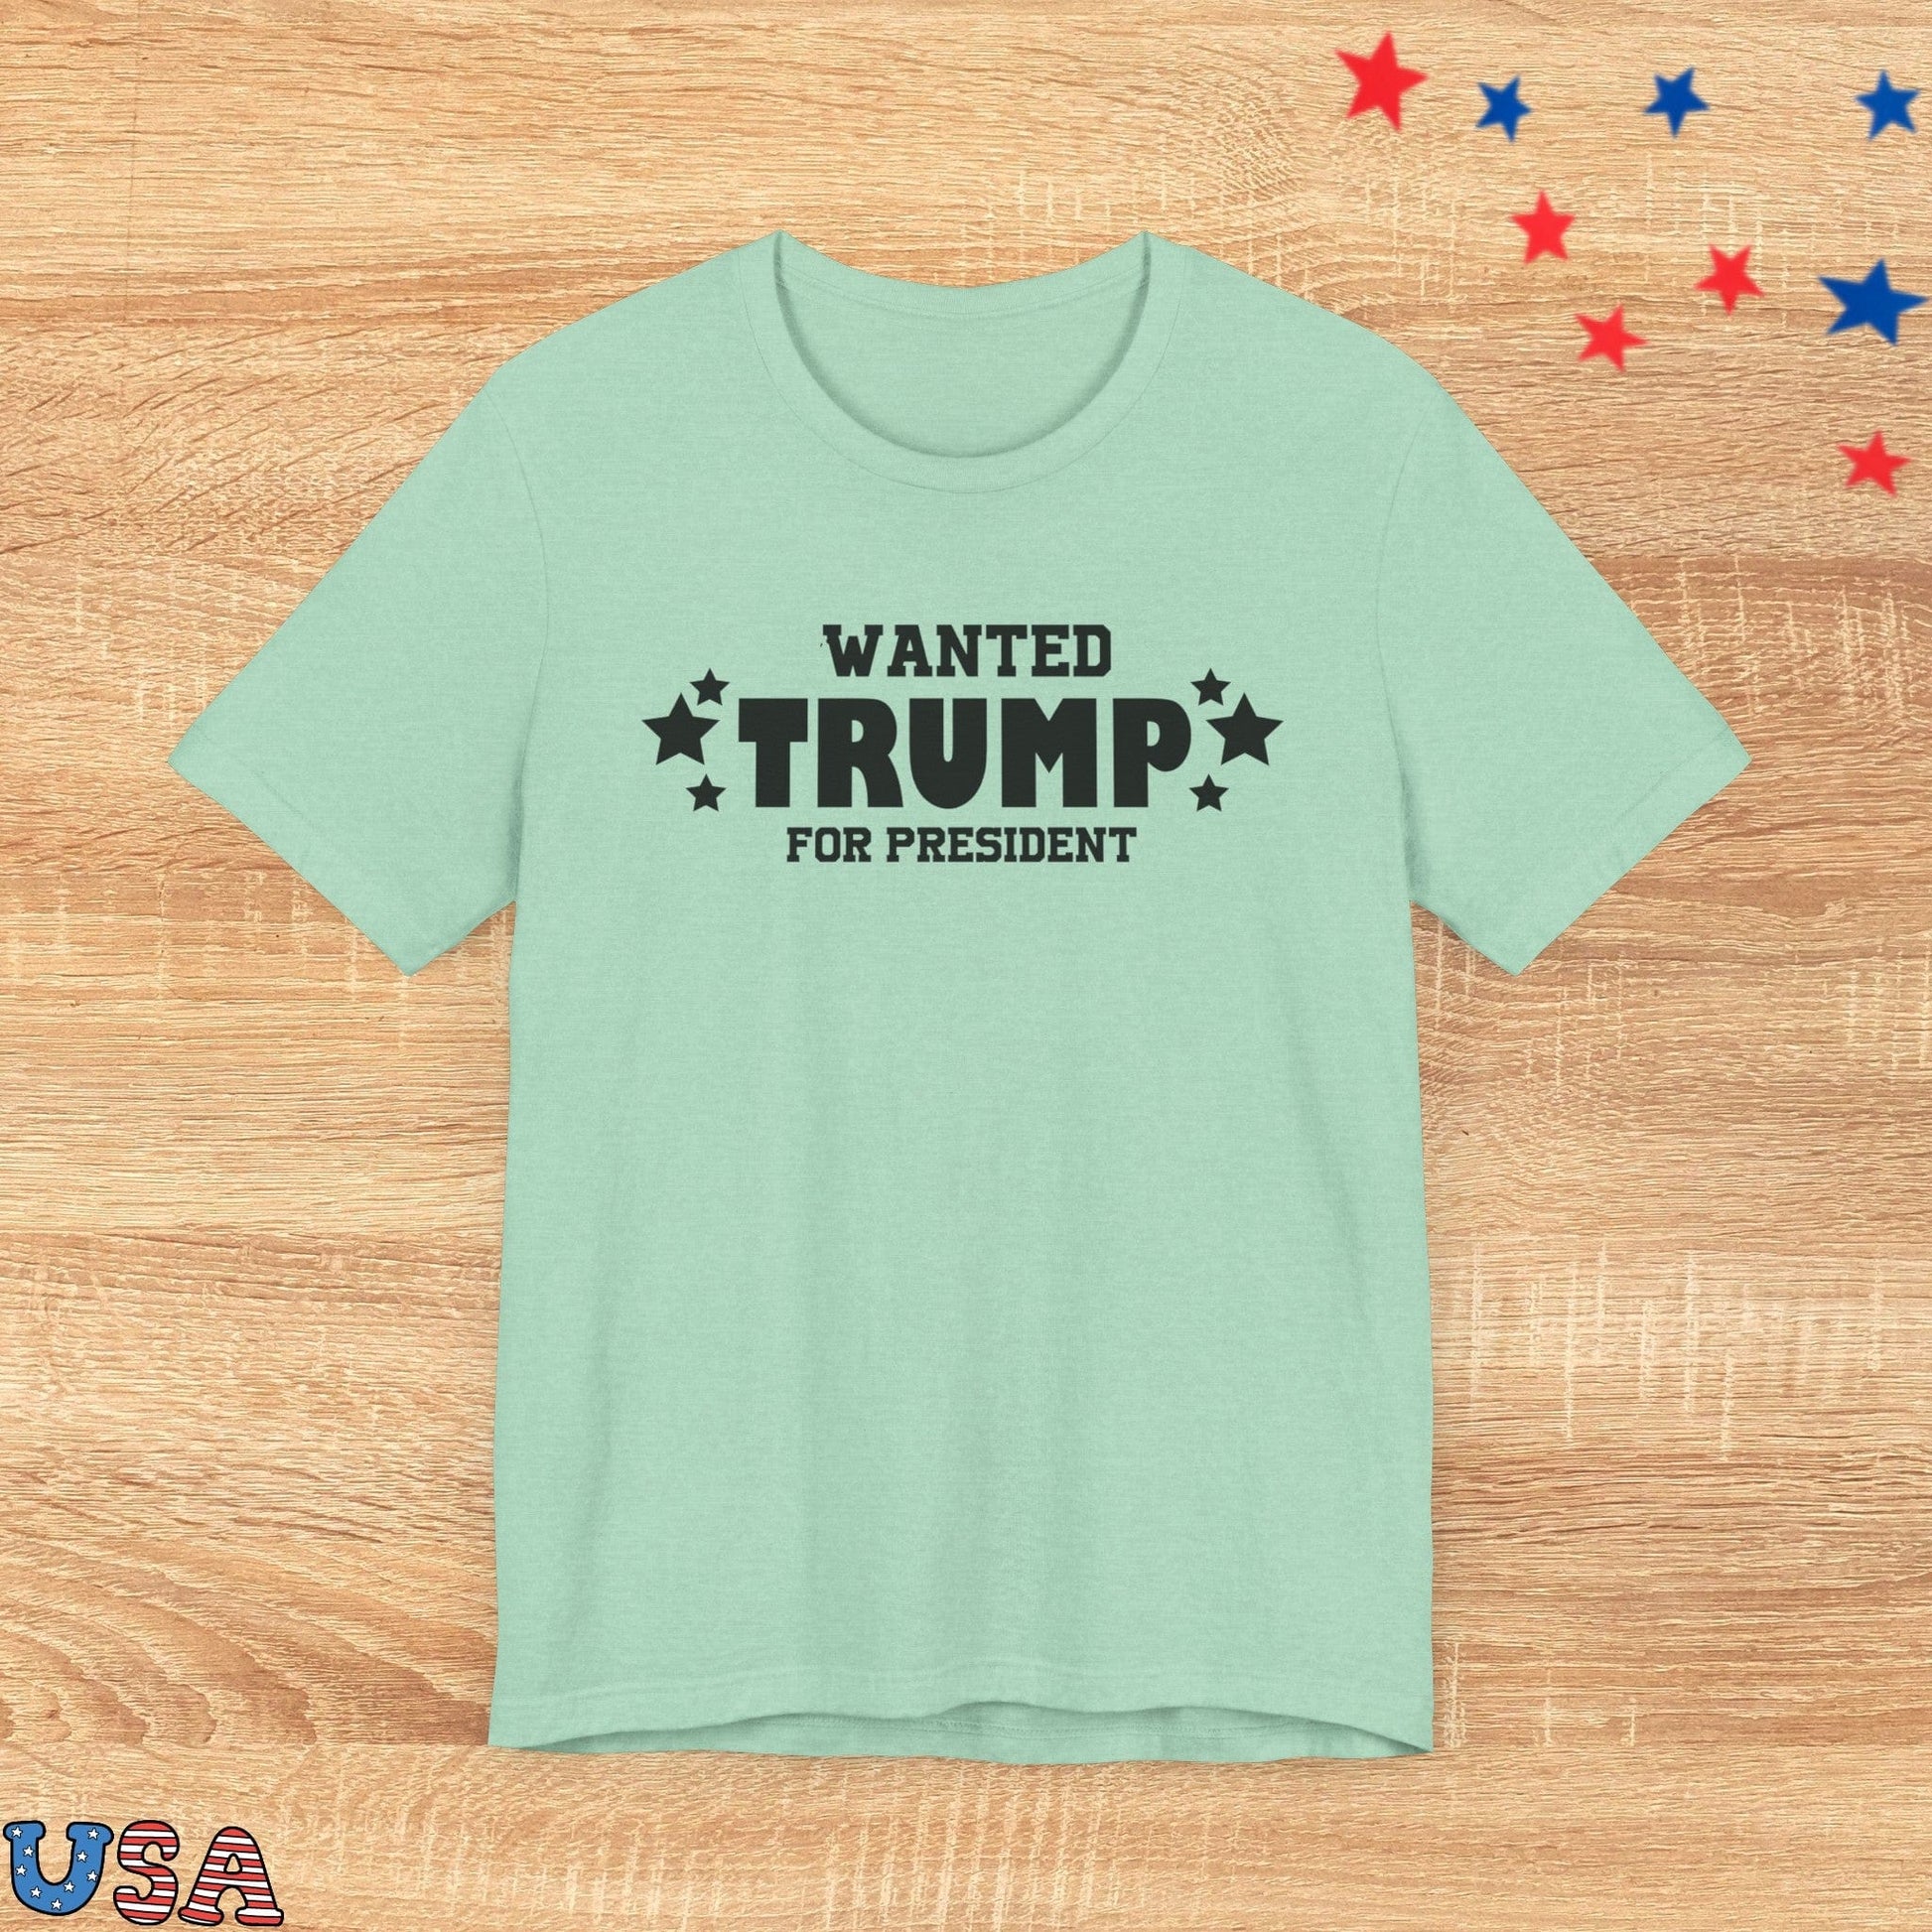 patriotic stars T-Shirt Heather Mint / XS Wanted Trump For President